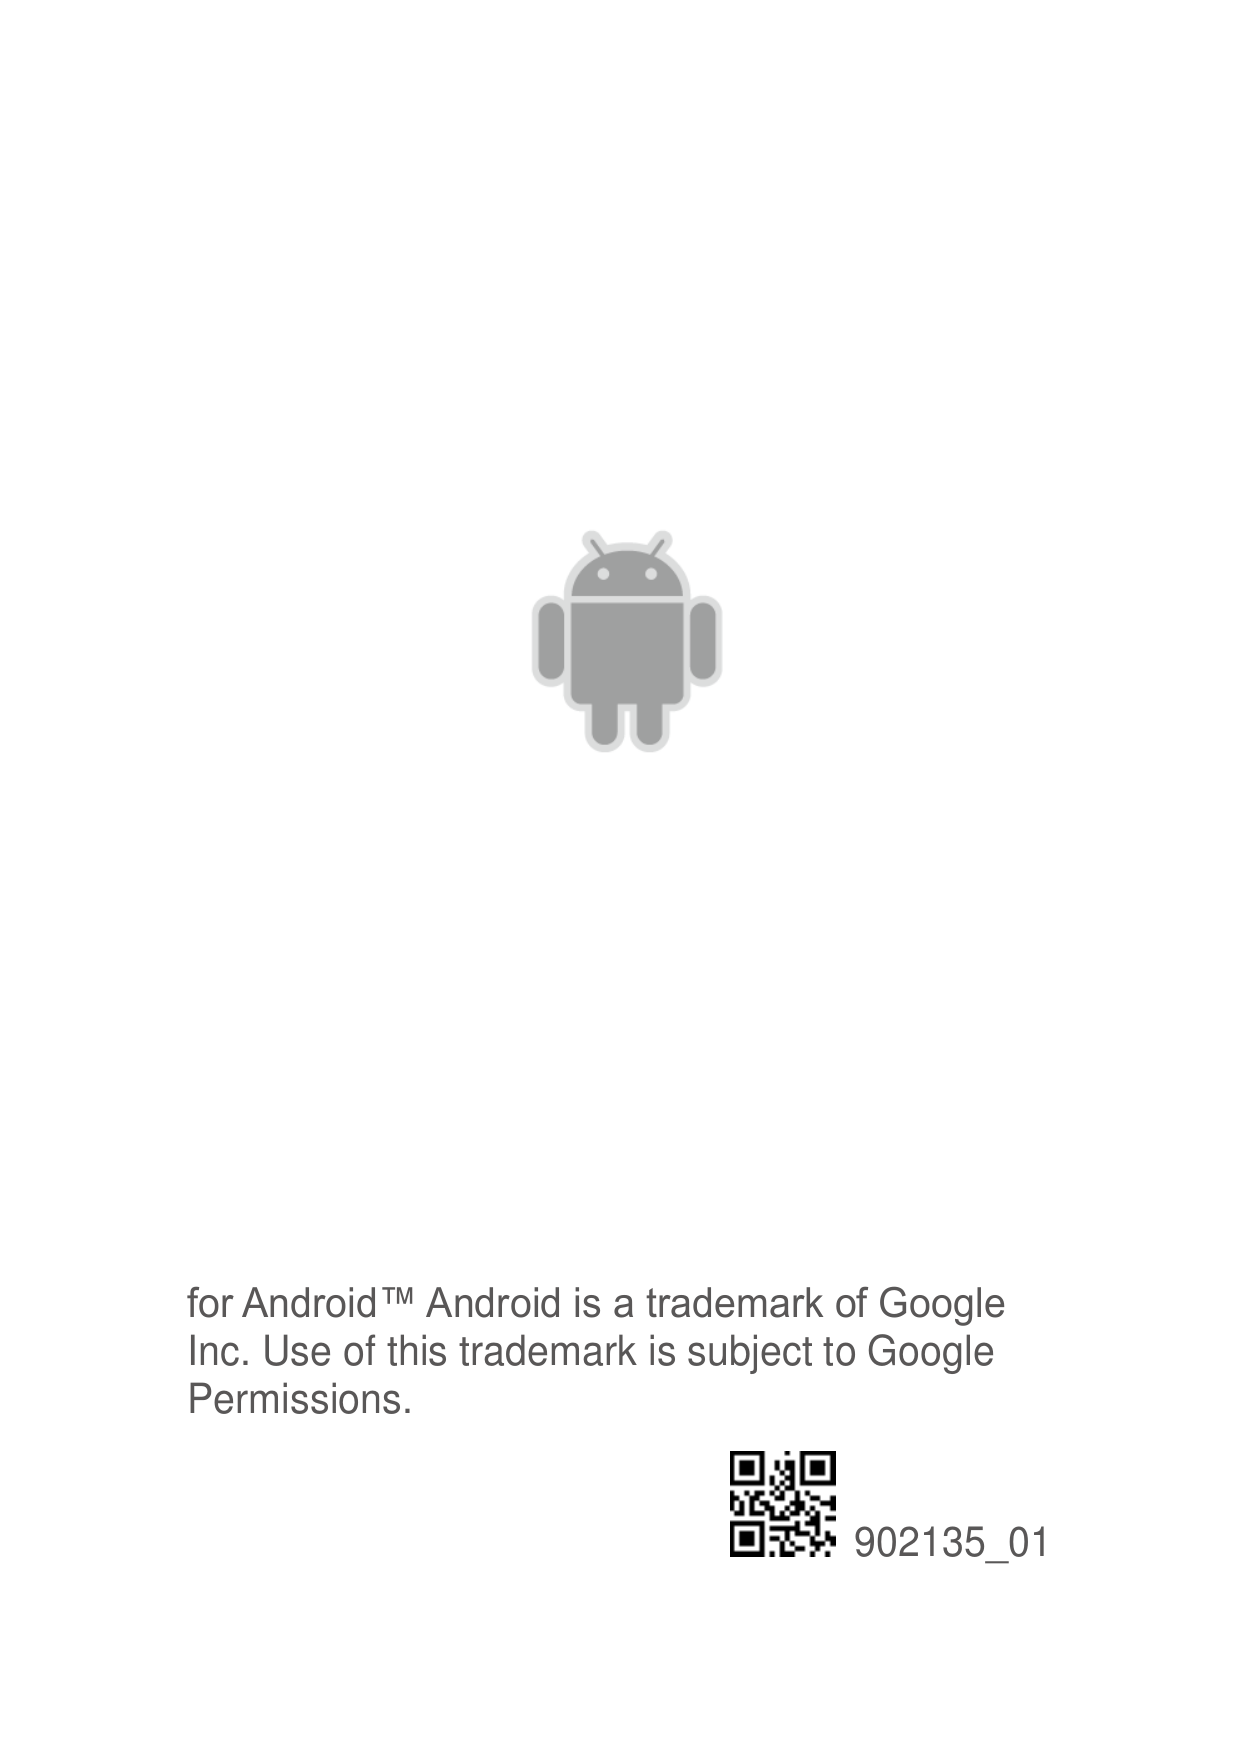     for Android™ Android is a trademark of Google Inc. Use of this trademark is subject to Google Permissions.  902135_01 